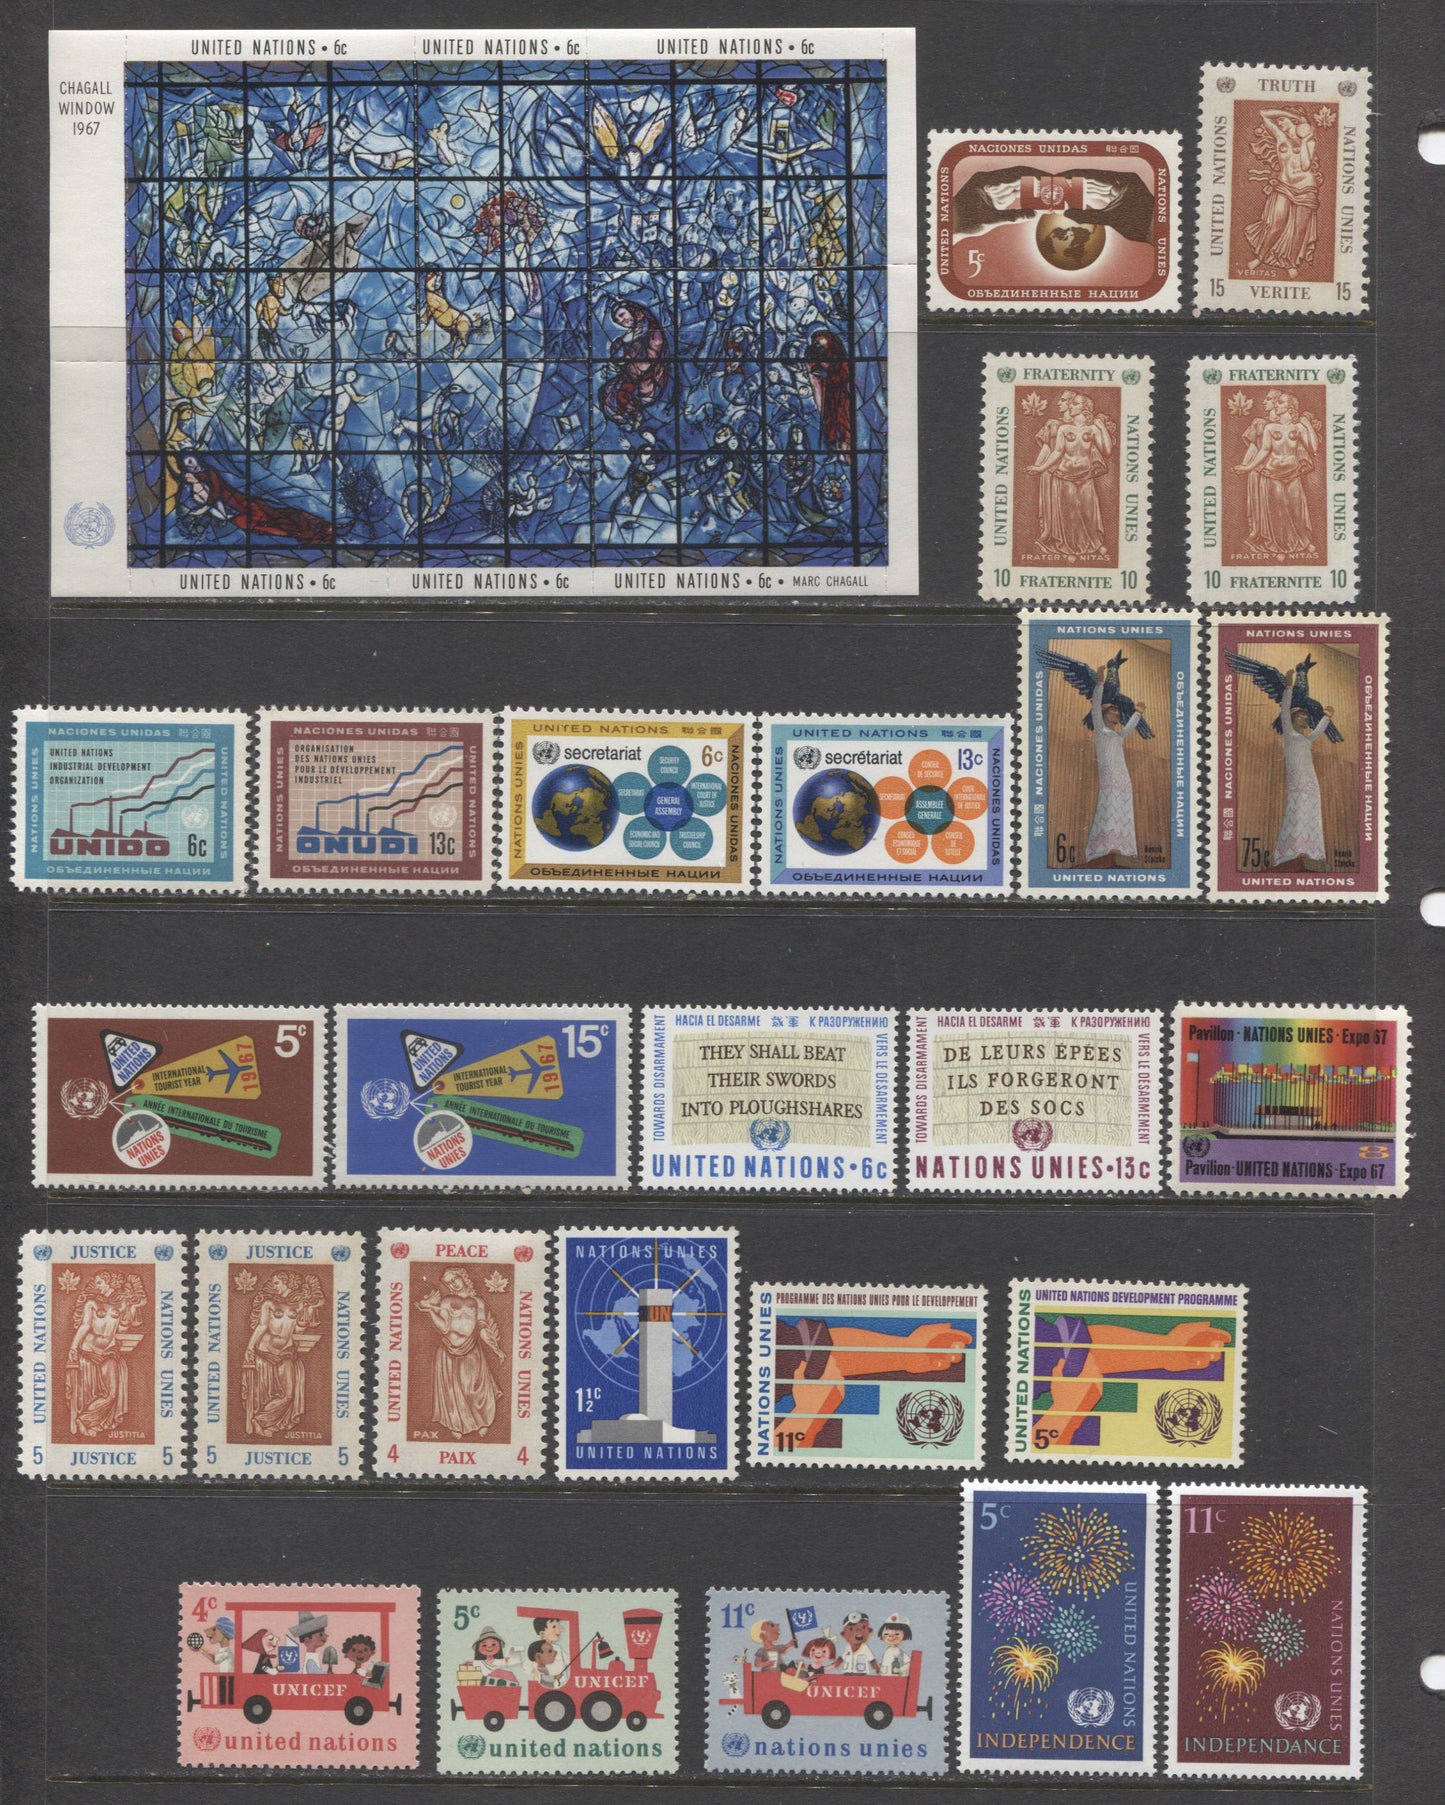 Lot 193 United Nations SC#139/202 1967-1969 Commemorative Issues, A Mostly Complete Run Of 58 Very Fine Mostly NH Examples Plus Souvenir Sheets. 2017 Scott Cat. $14.90 USD, Click on Listing to See ALL Pictures